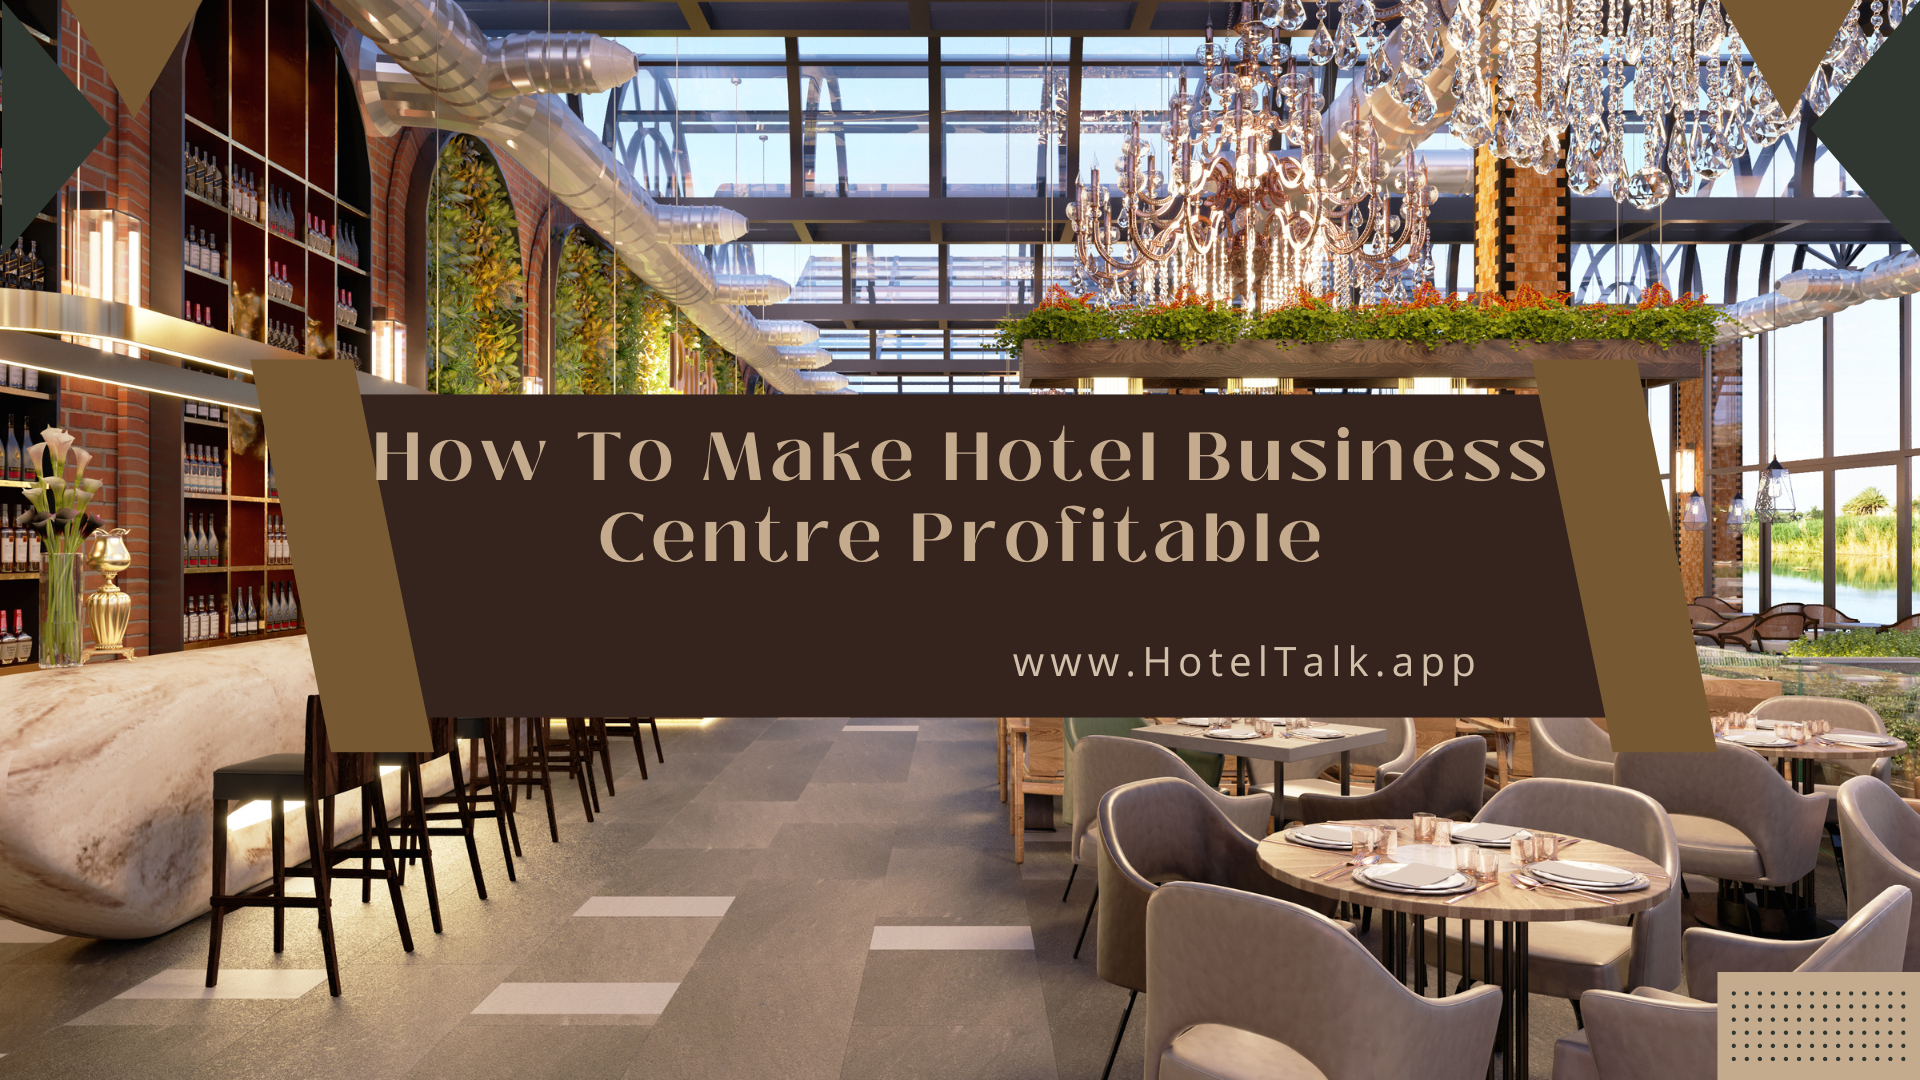 How To Make Hotel Business Centre Profitable